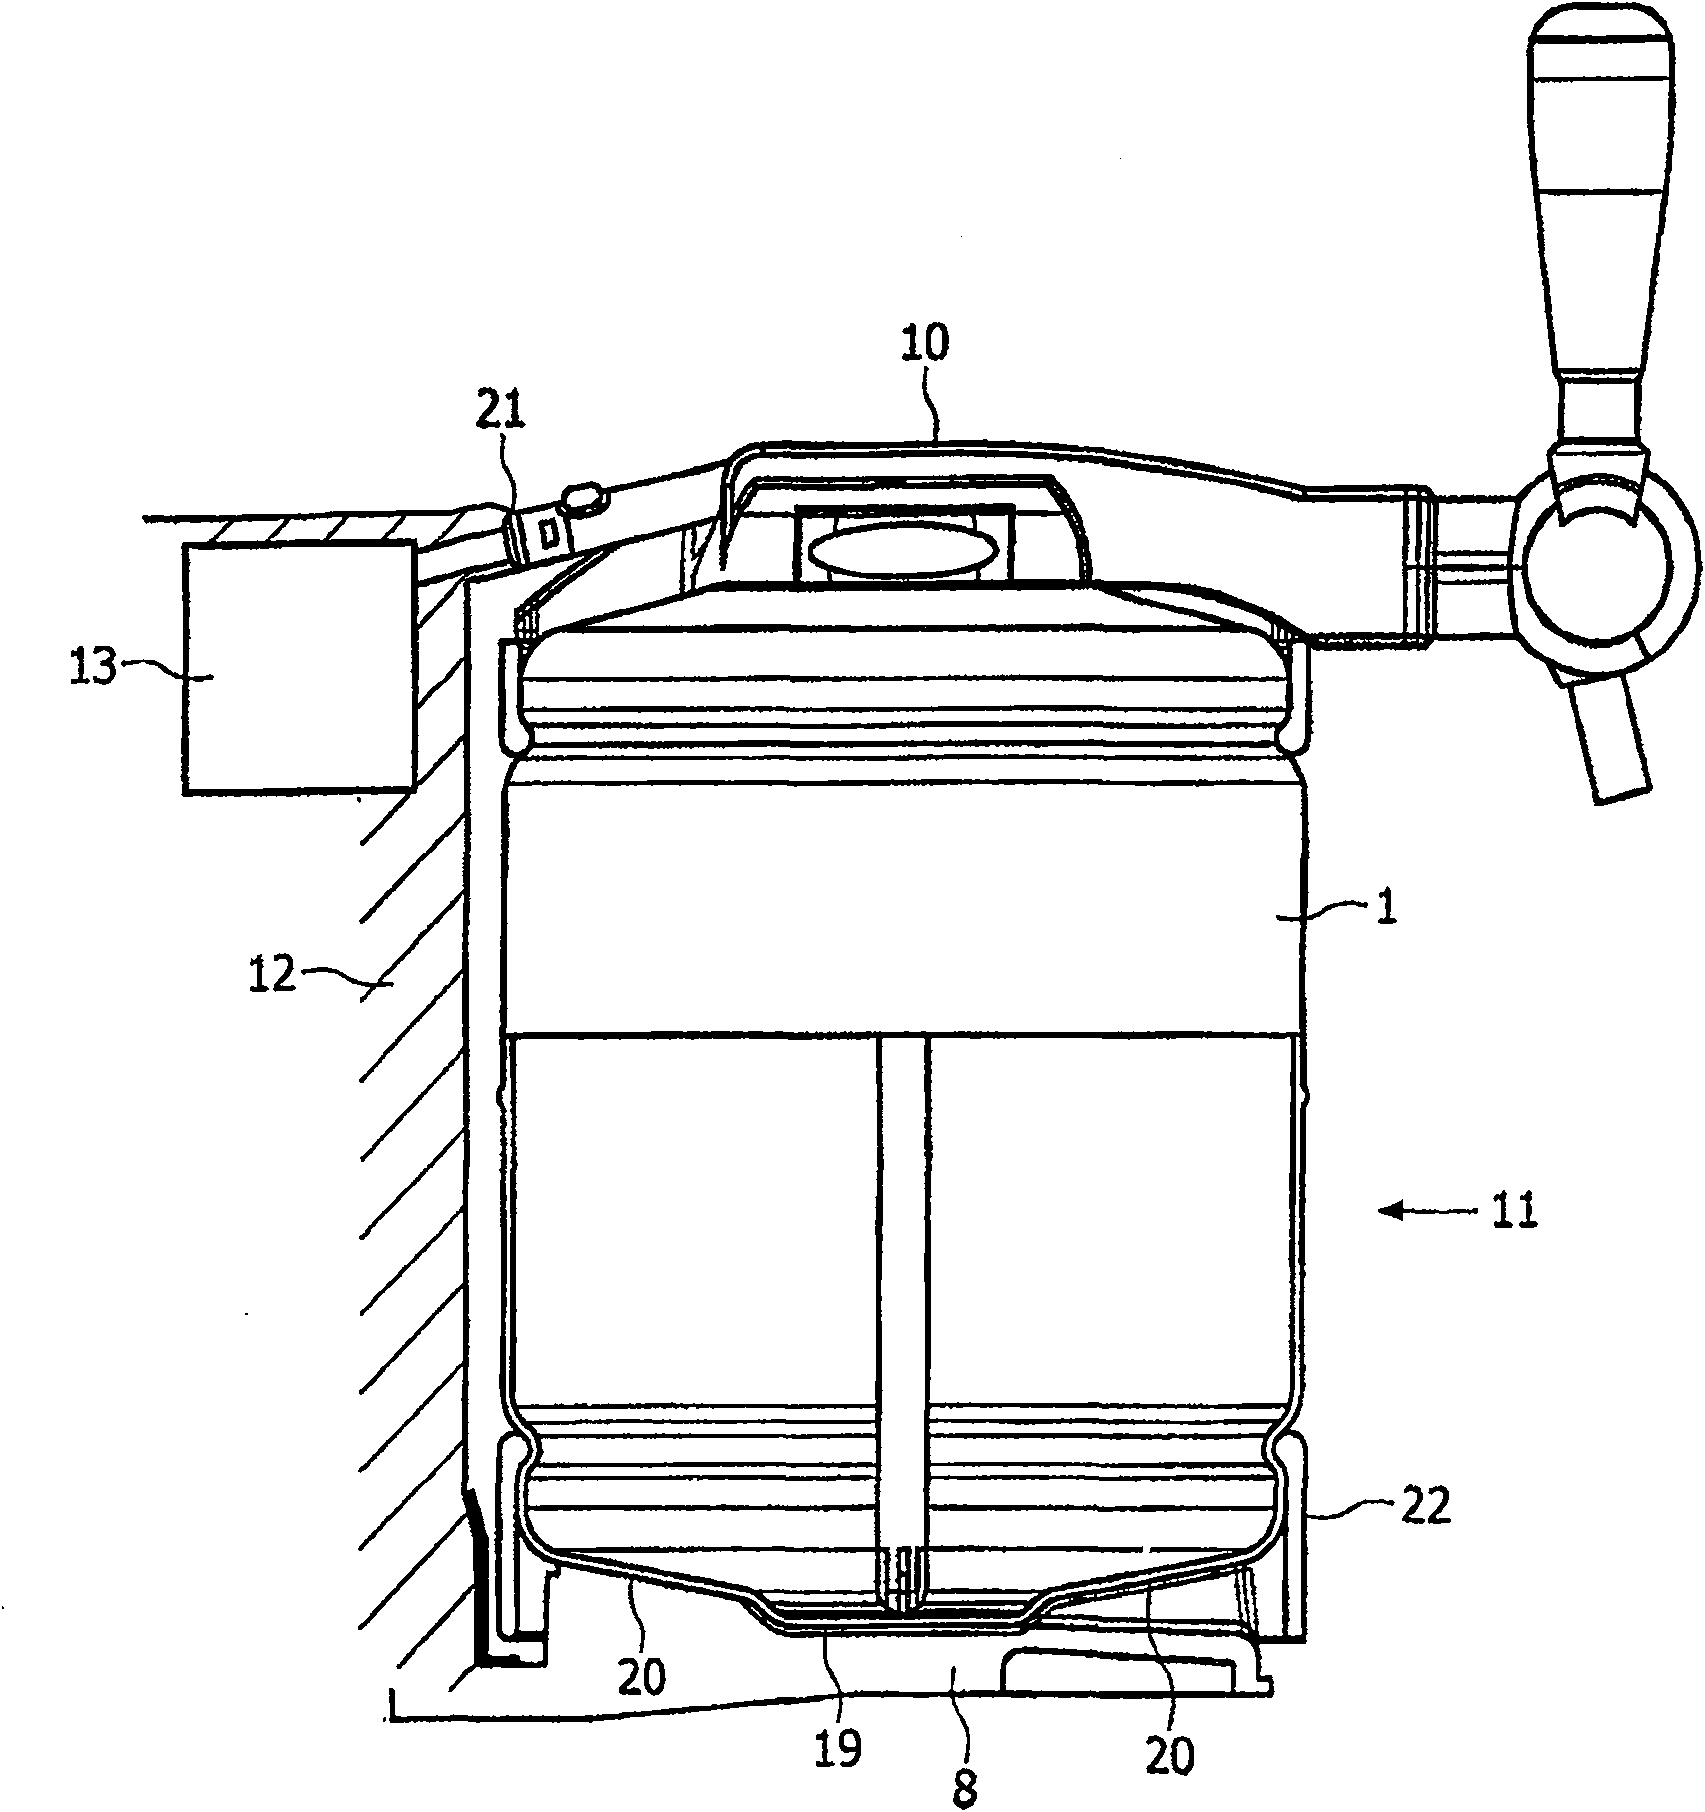 Beverage dispensing assembly and container and base element